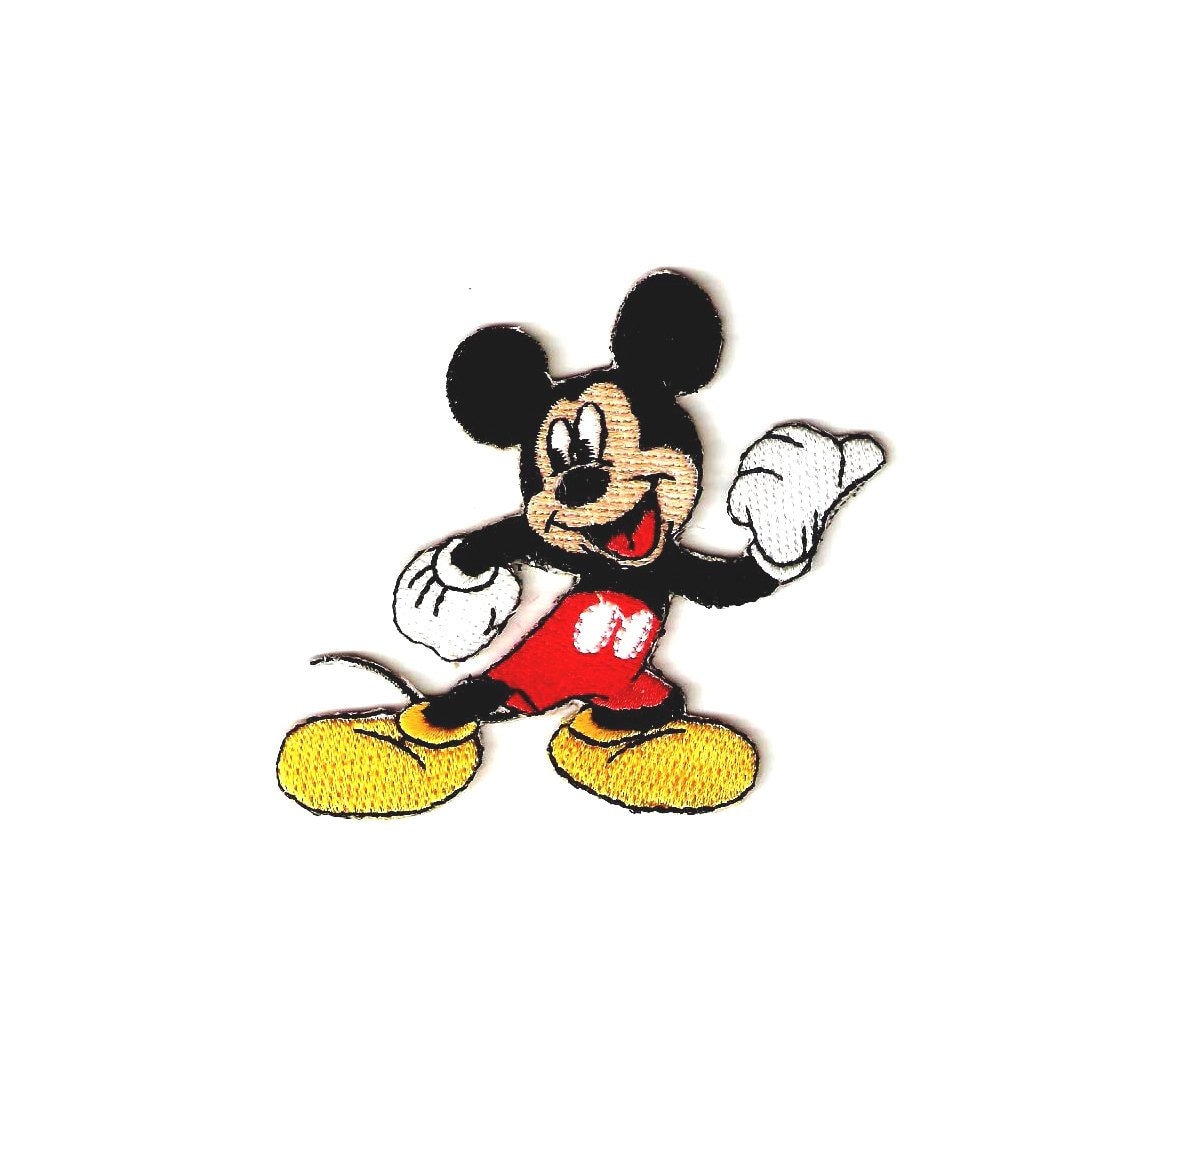 2.25 Mickey Mouse Embroidered IRON On PATCH / No Sew hat bag Patch Classic  Mickey ears head round circle patch with red rim Disney